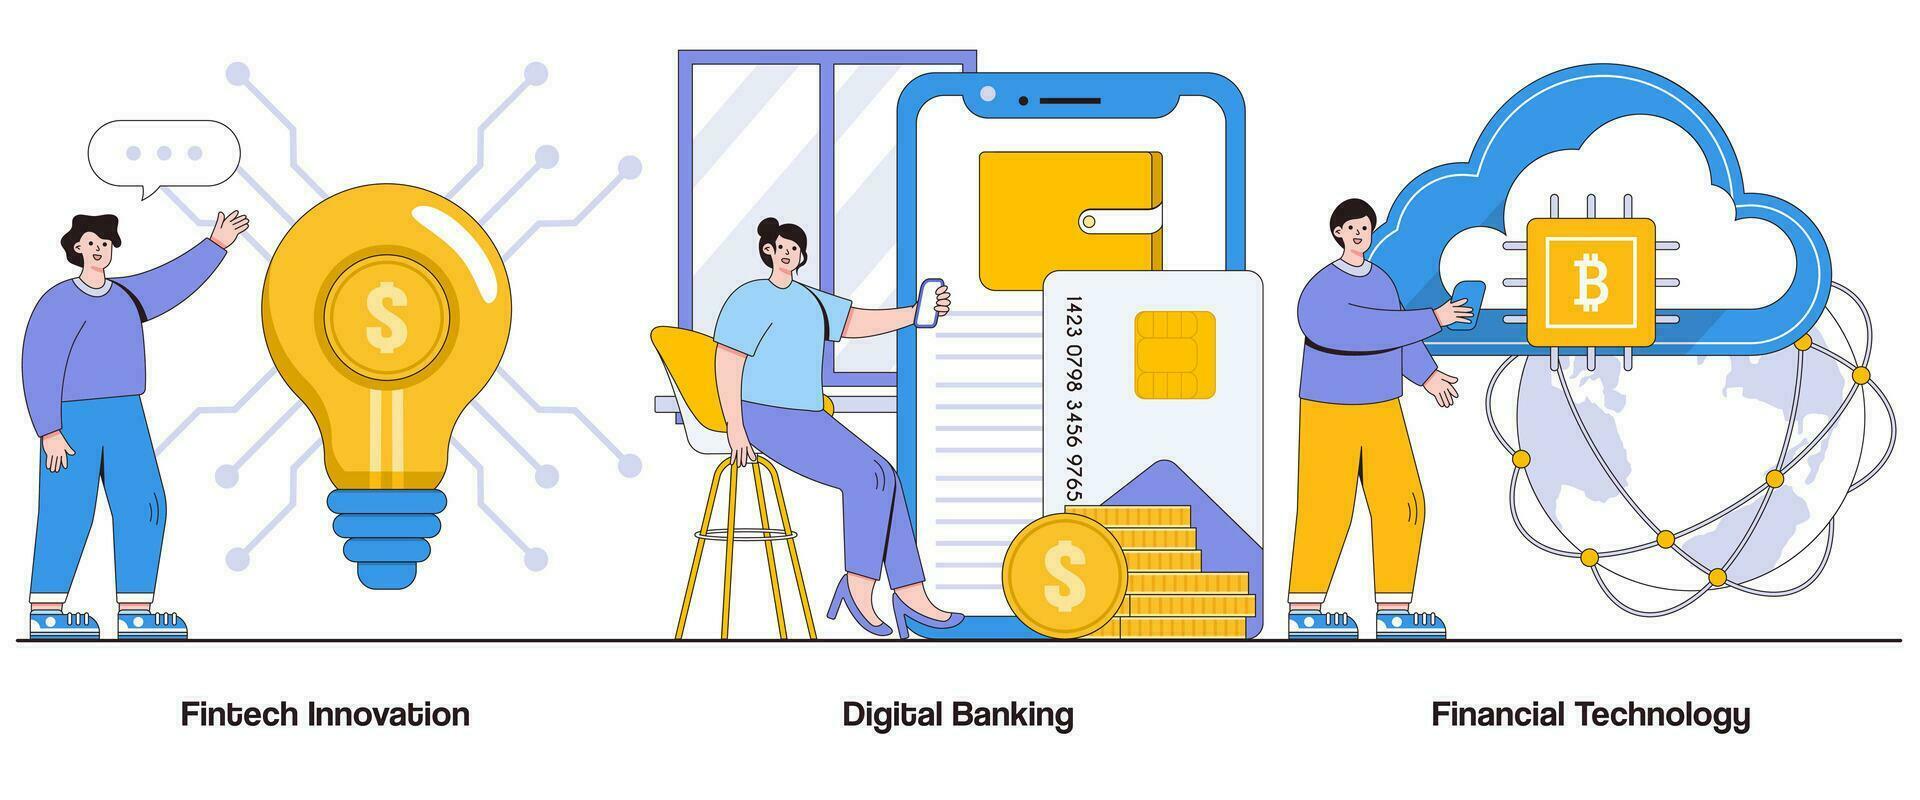 Fintech innovation, digital banking, financial technology concept with character. Fintech Solutions abstract vector illustration set. Financial disruption, tech-driven banking, fintech evolution